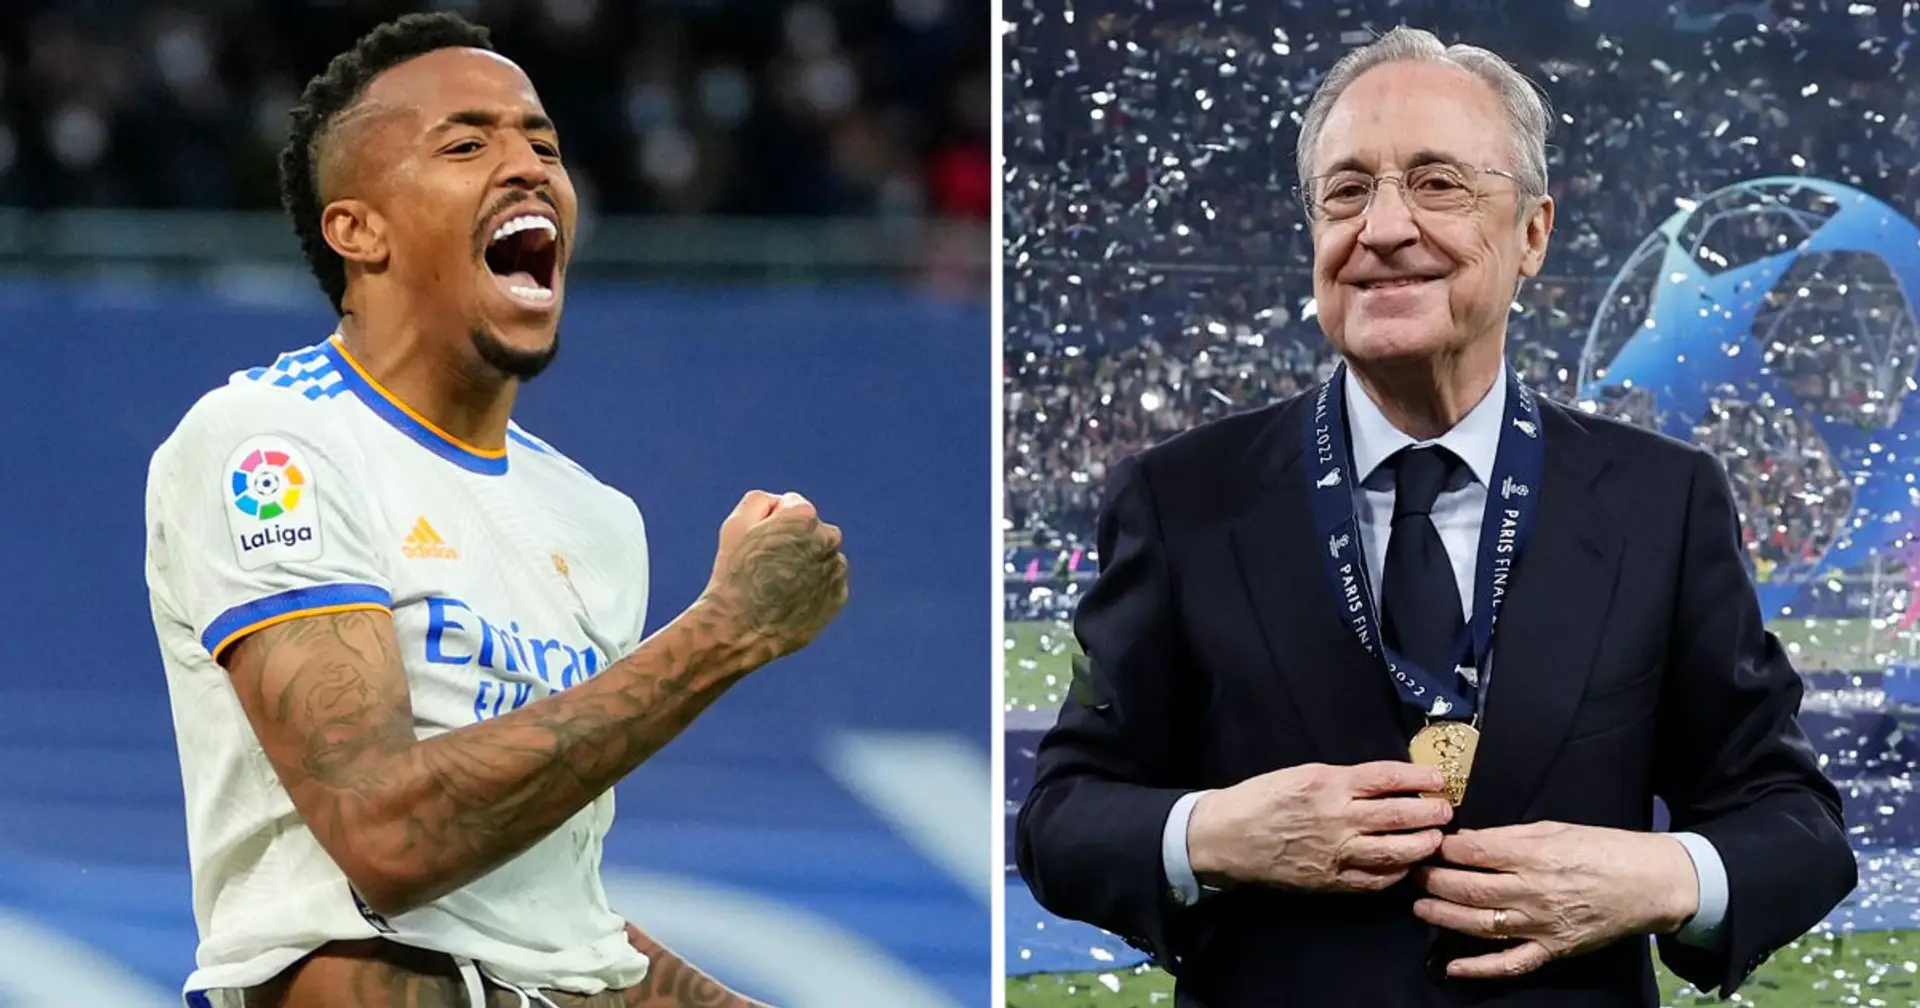 Militao to sign new contract and 3 more under-radar stories